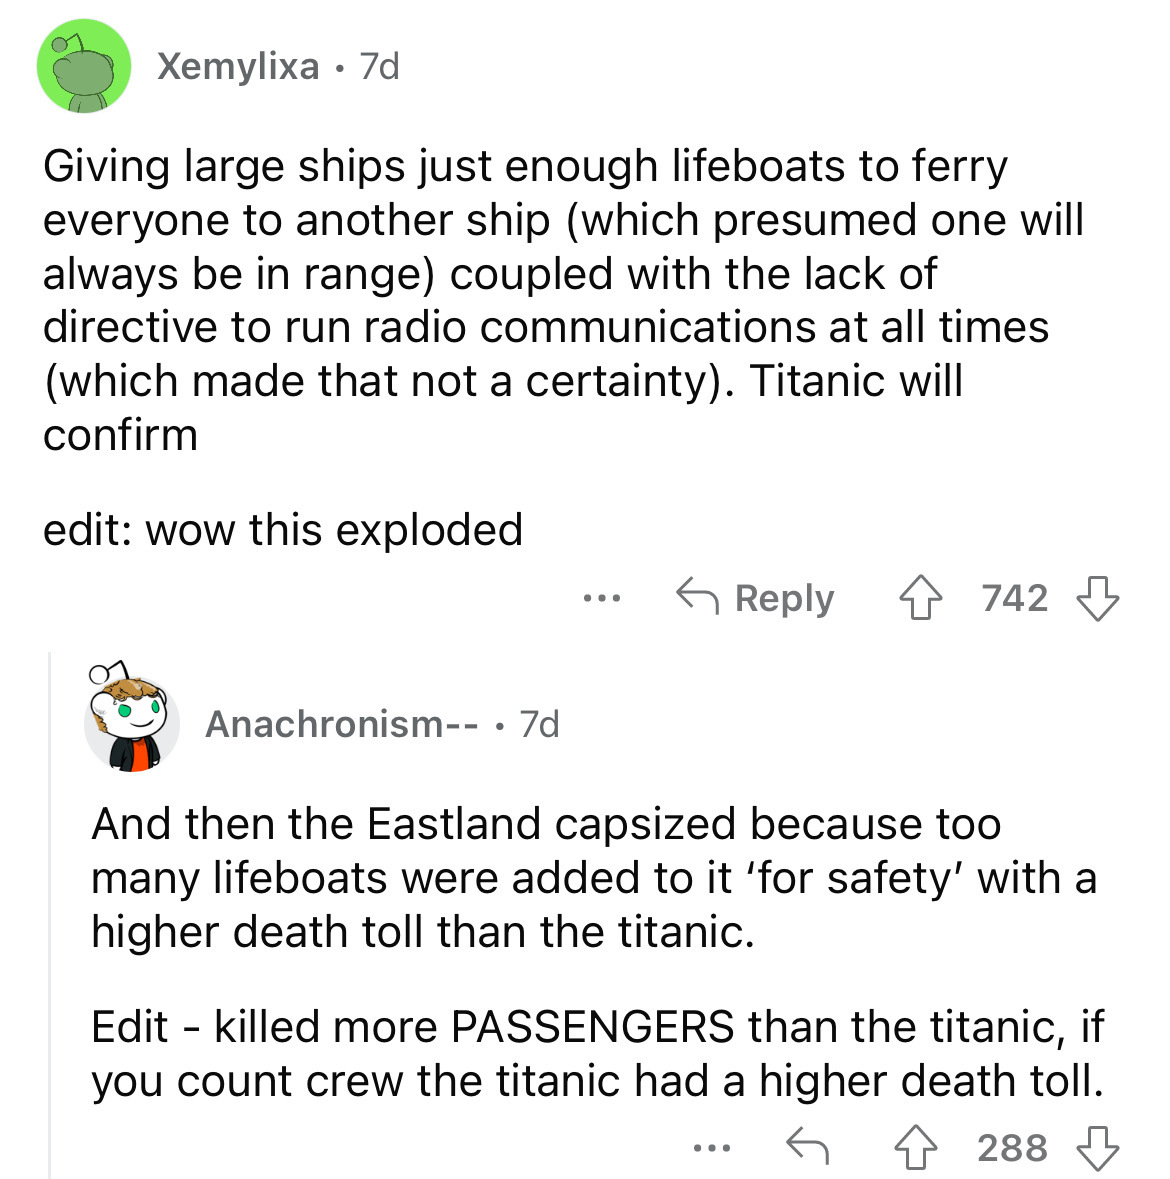 Xemylixa. 7d Giving large ships just enough lifeboats to ferry everyone to another ship which presumed one will always be in range coupled with the lack of directive to run radio communications at all times which made that not a certainty. Titanic will…